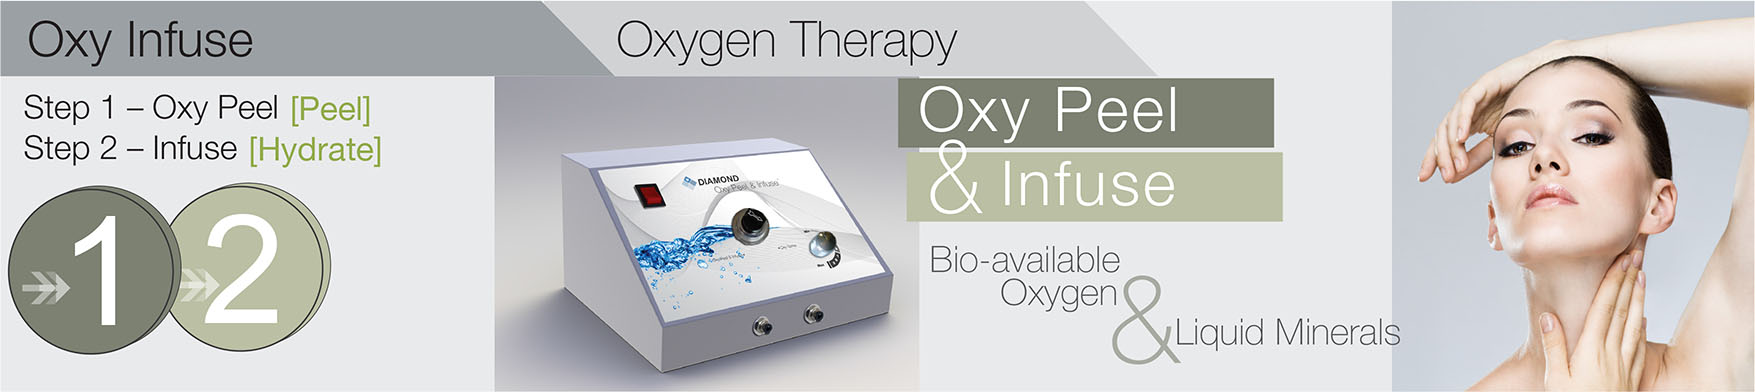 Banner Oxy Infuse